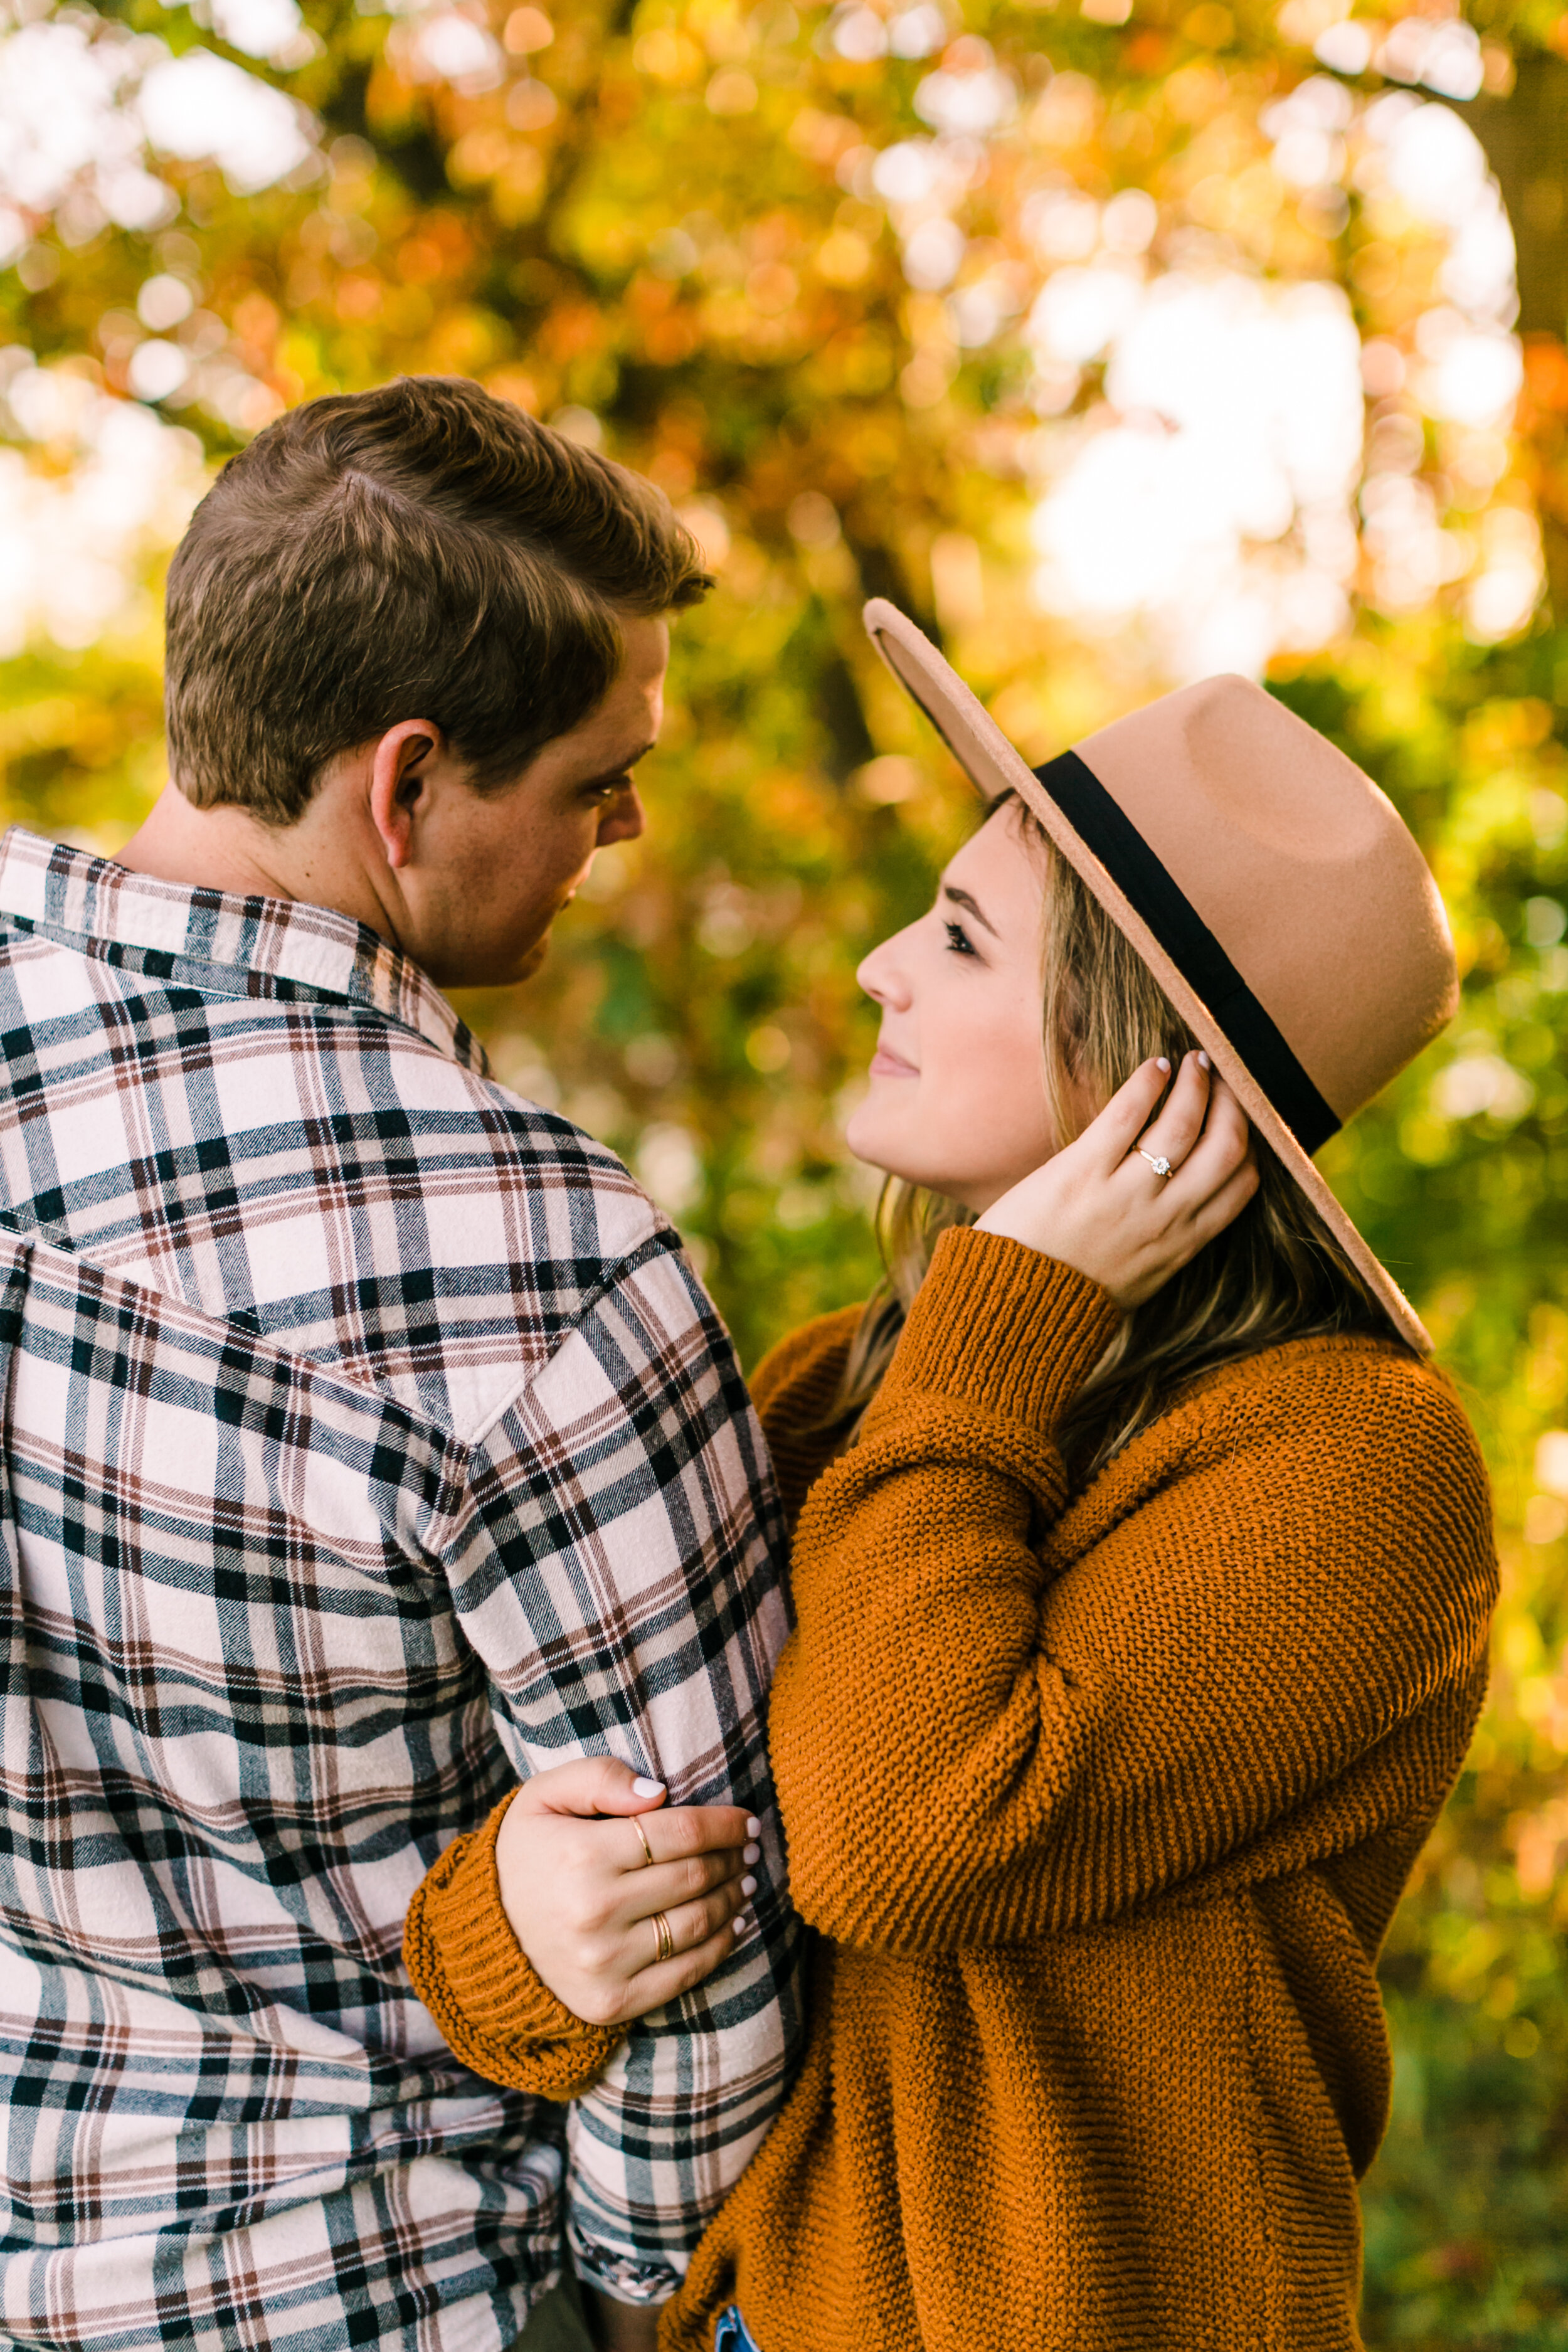 Tennessee+Fall+Engagement+Photos+Puppy (35 of 63).jpg